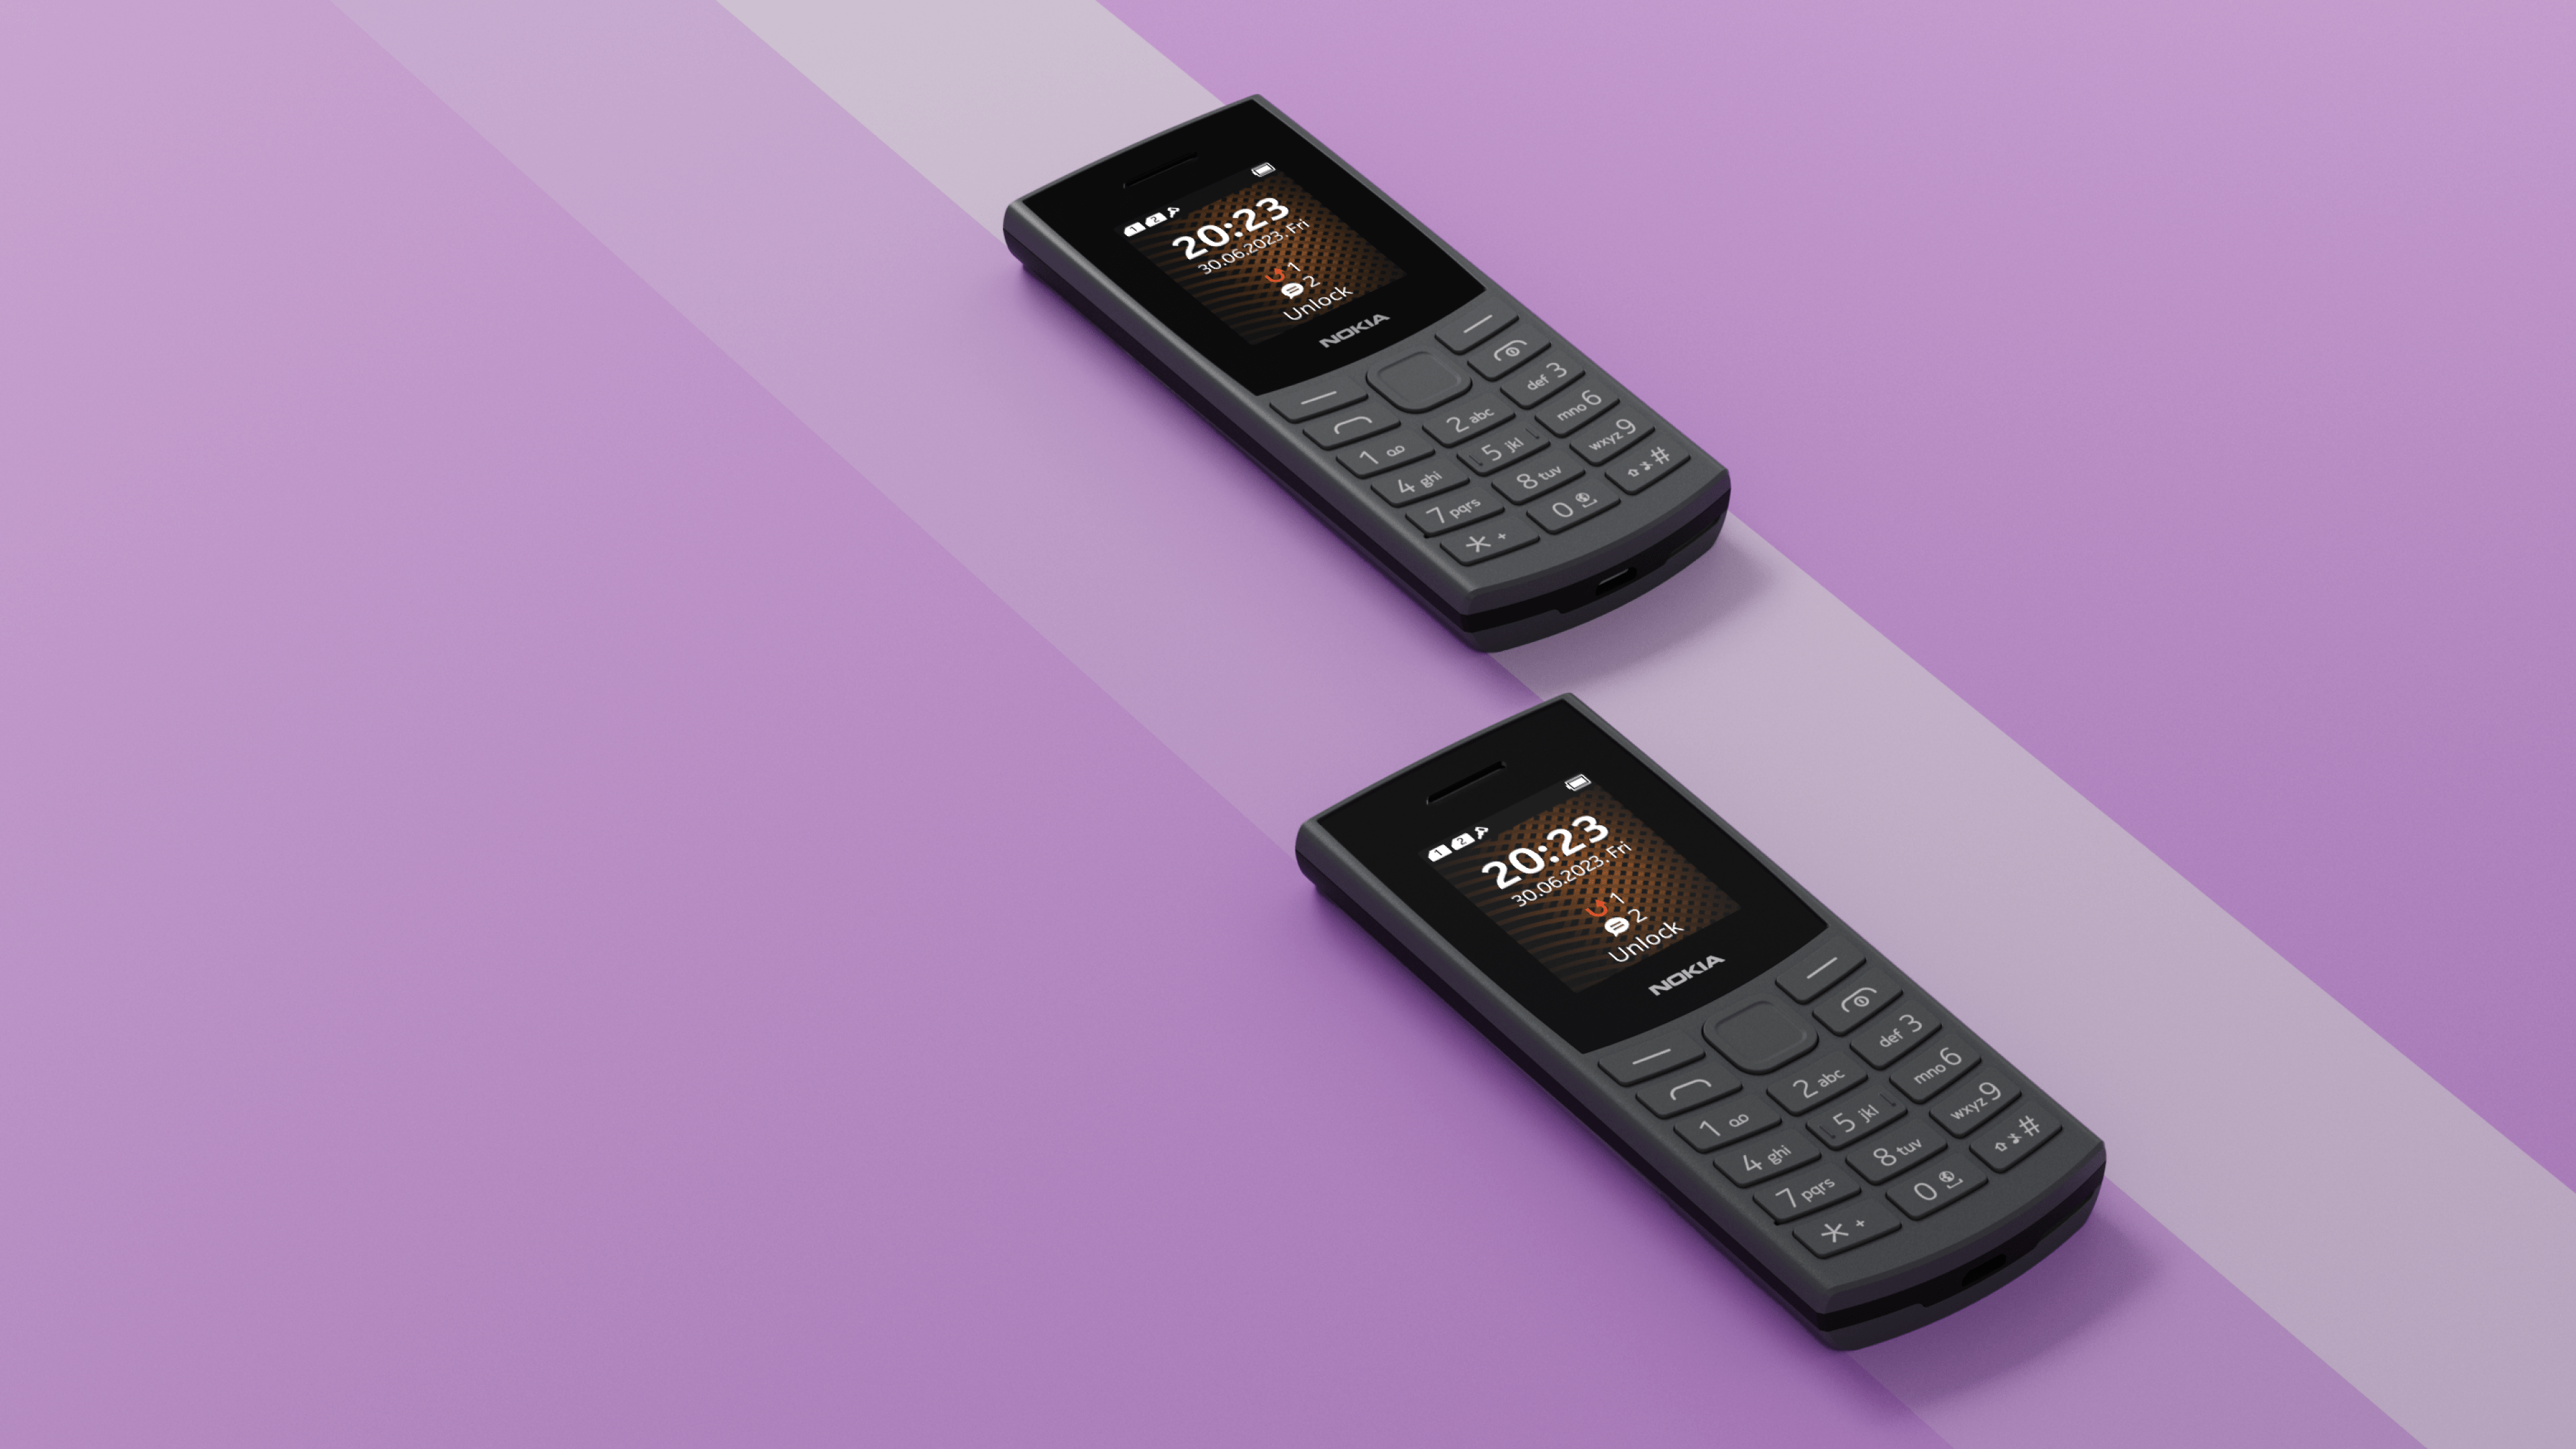 Nokia 105 feature phone with 4G internet